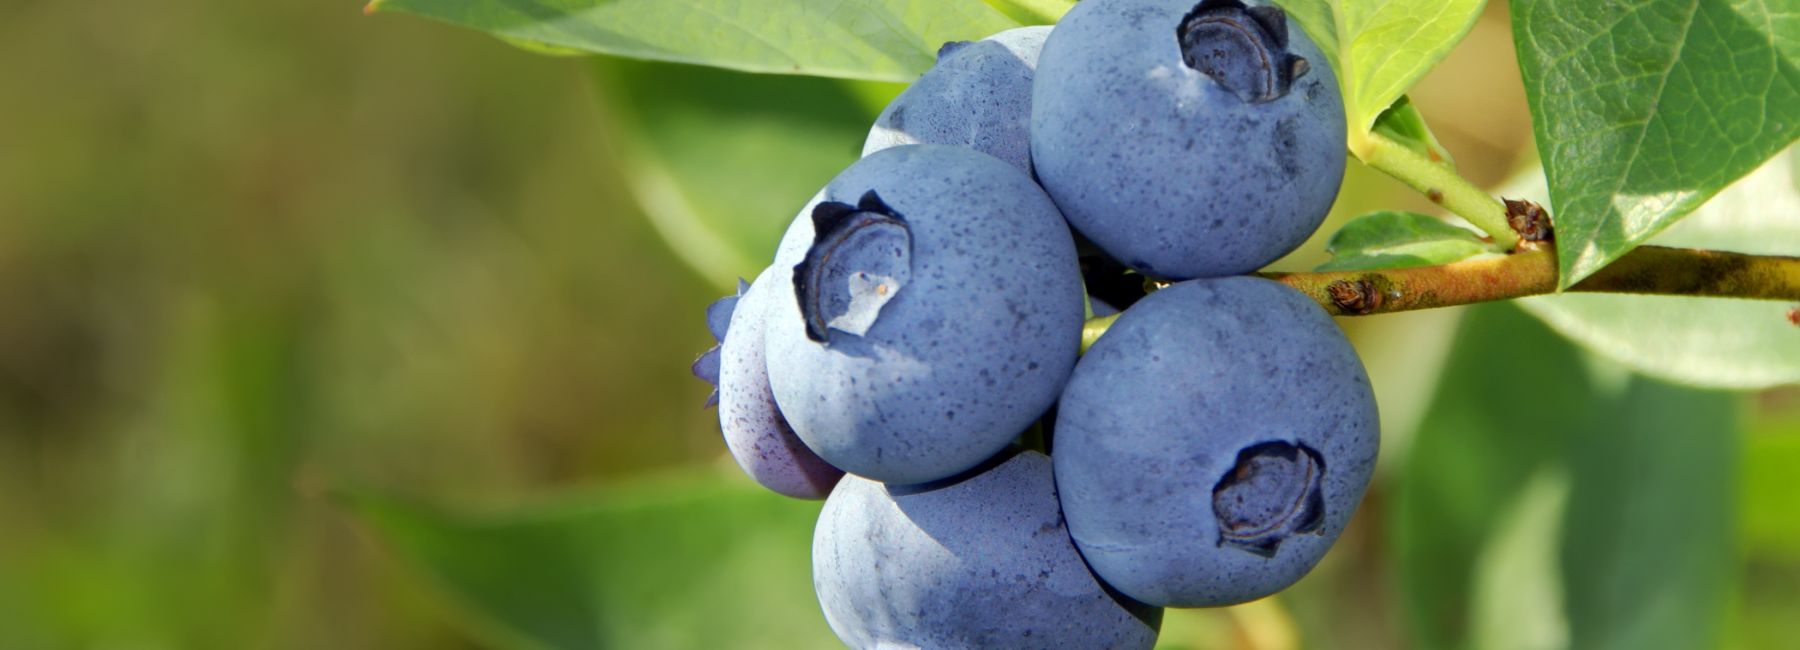 Close up of blueberries on bush